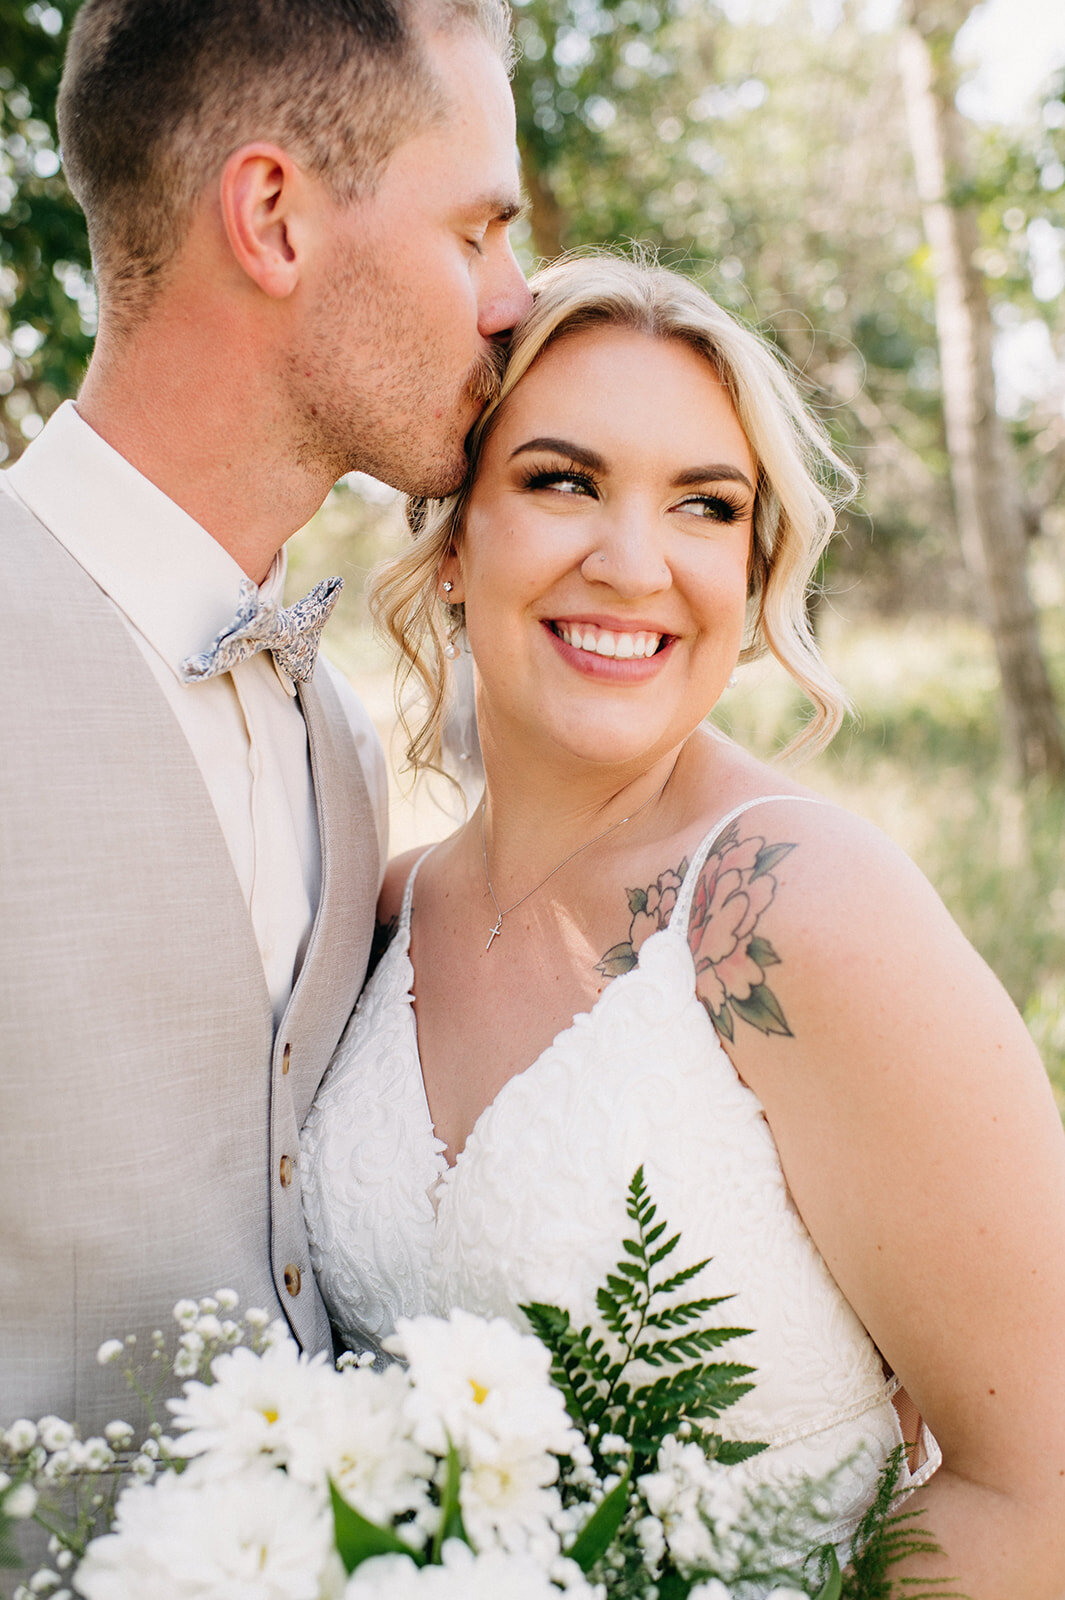 Bride and groom embracing, captured by Kristin Sarah Photography. Featured on the Bronte Bride Vendor Guide.